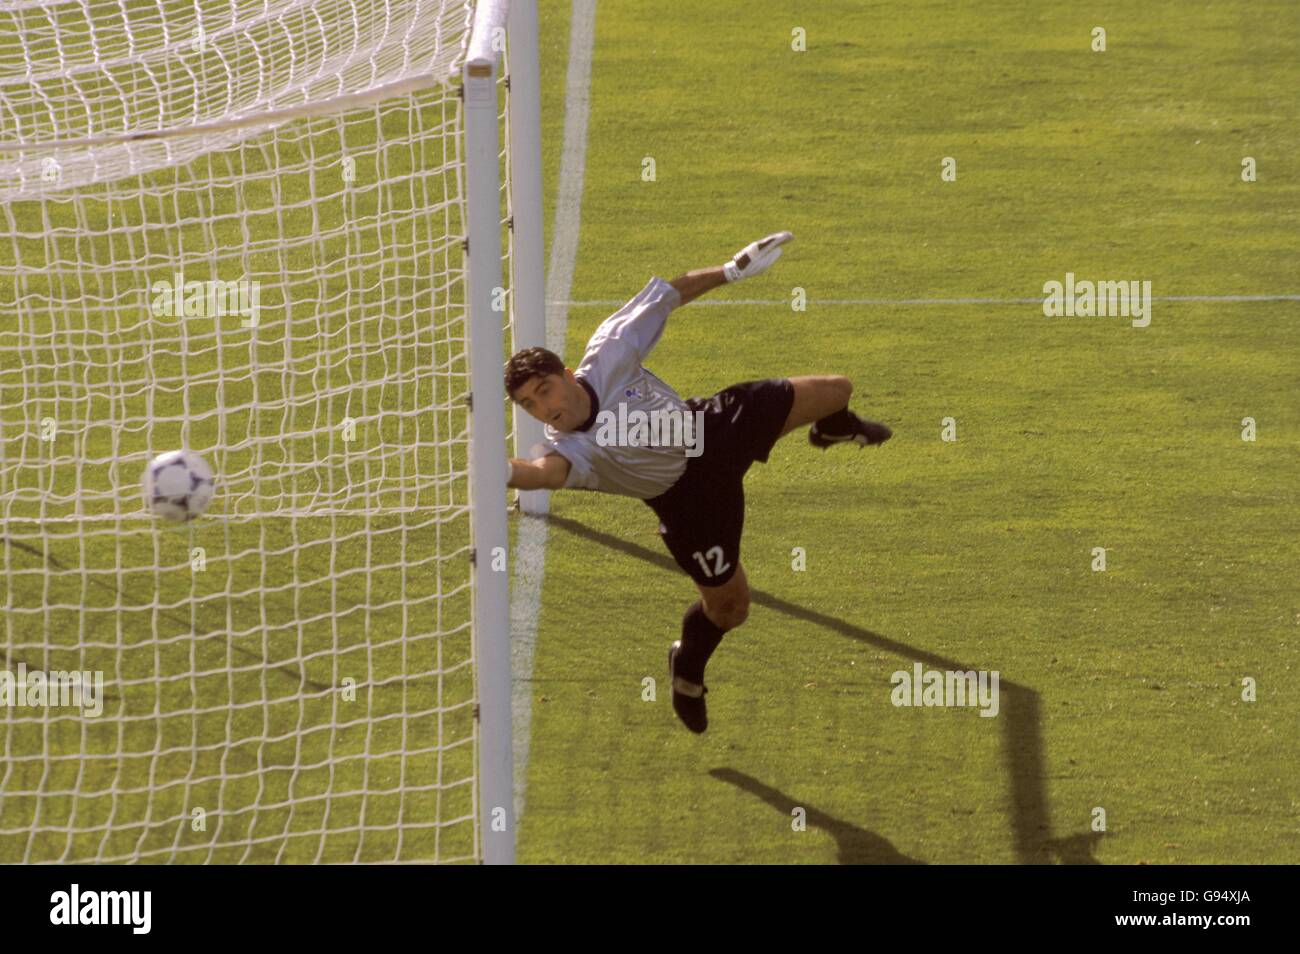 Italy's Gianluca Pagliuca fails to save a header from Chile's Marcelo Salas. Stock Photo